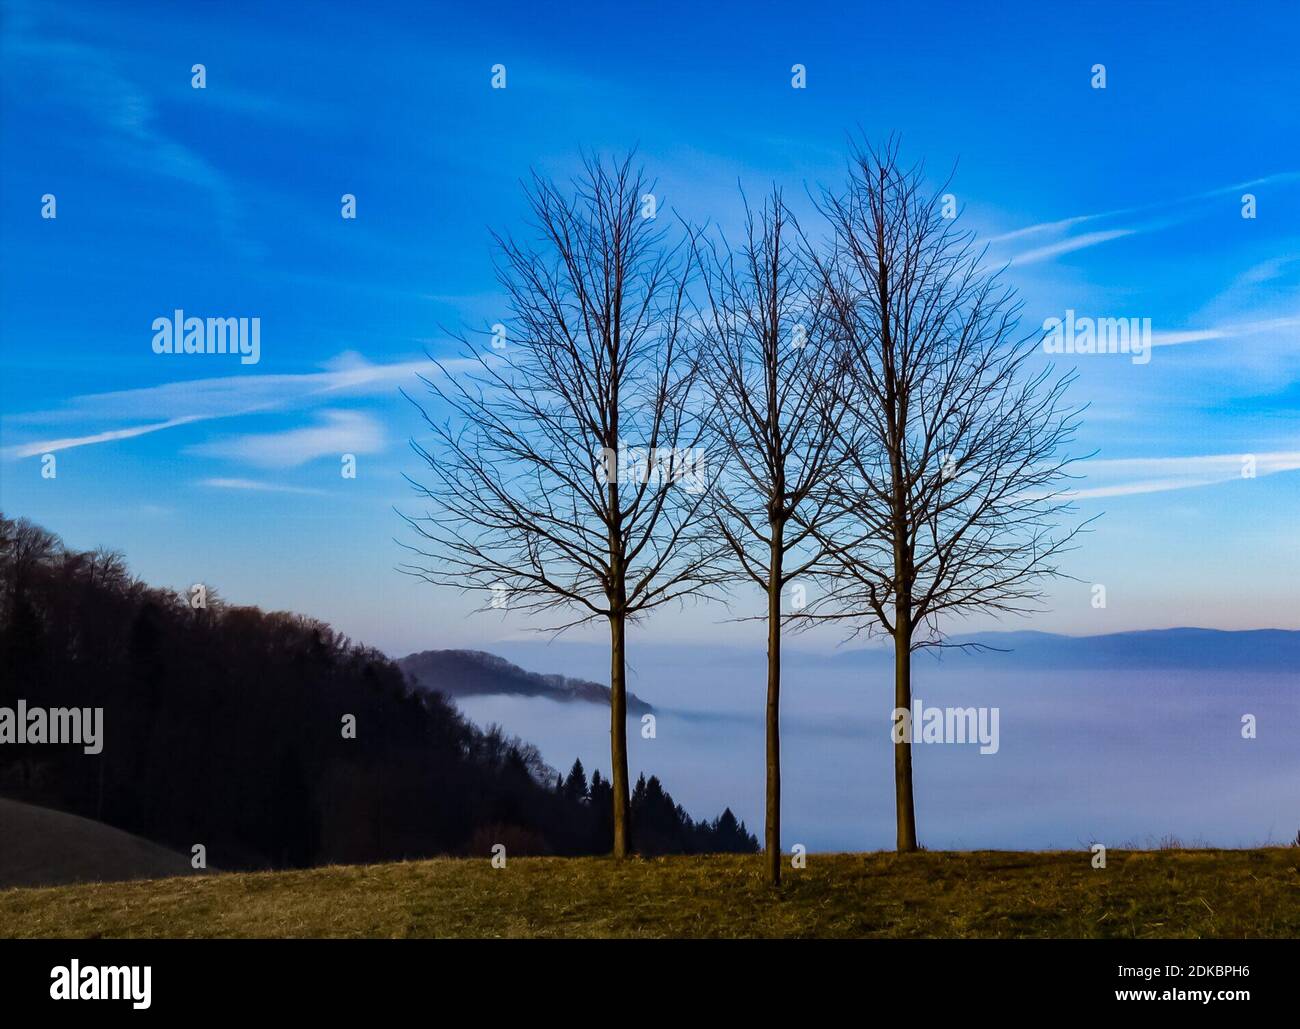 Bare Trees On Field Against Blue Sky Stock Photo